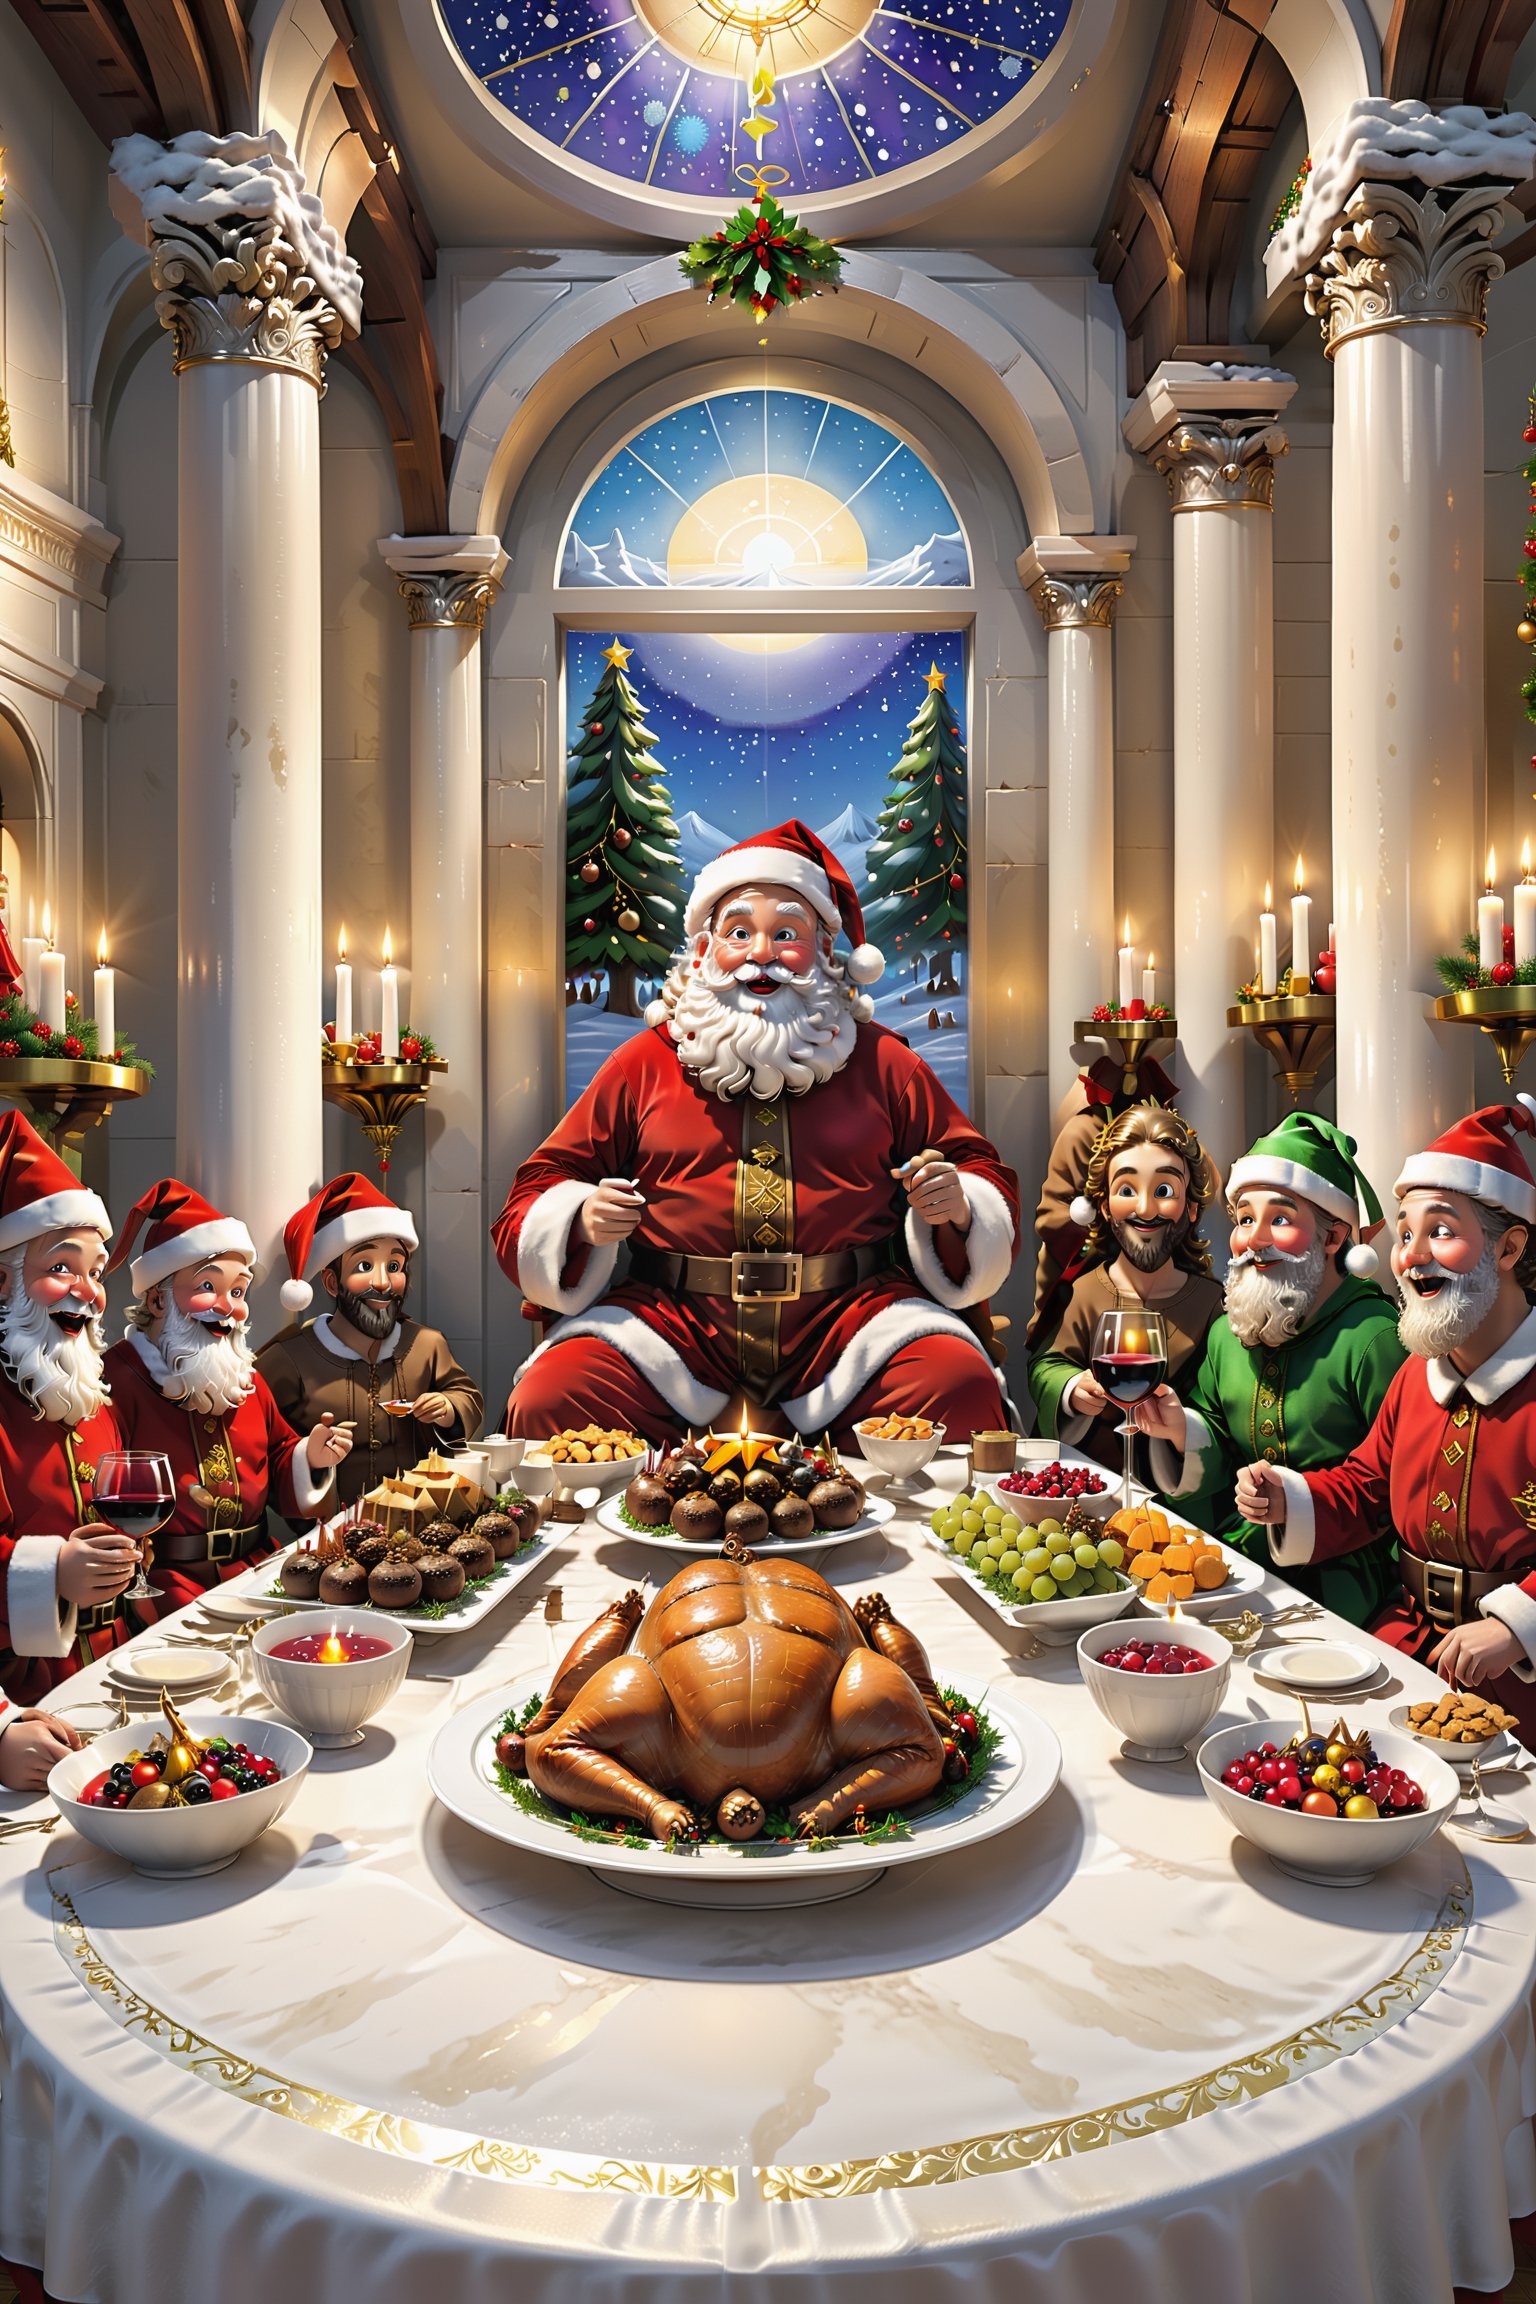 In this creative scene, Santa Claus appears as a modern Christmas legend in the famous artwork The Last Supper. The scene seems to have traveled back in time to put a new spin on this classic scene.

At the long dining table, Santa Claus sits in the place of Jesus Christ, surrounded by his twelve disciples, replacing the figures from the original painting with traditional Christmas decorations. The food on the table has also been transformed into Christmas specialties such as roast turkey, Christmas pudding and a variety of delicious treats.

Each of the disciples in the picture appears as a traditional Christmas character, which may be a reindeer, elf, snowman, and so on. They surround the table, displaying a solemn and cheerful atmosphere. The candelabra are lit with Christmas candles, adding color to the scene.

Santa Claus looks kind and holds a glass of wine in his hand as if he is saluting this special moment. His eyes sparkle with love and care, infusing the scene with a feeling of warmth.

The whole picture is a skillful fusion of culture and tradition, combining art classics with Christmas elements to create a scene that is both solemn and festive, bringing people a new artistic and cultural experience.